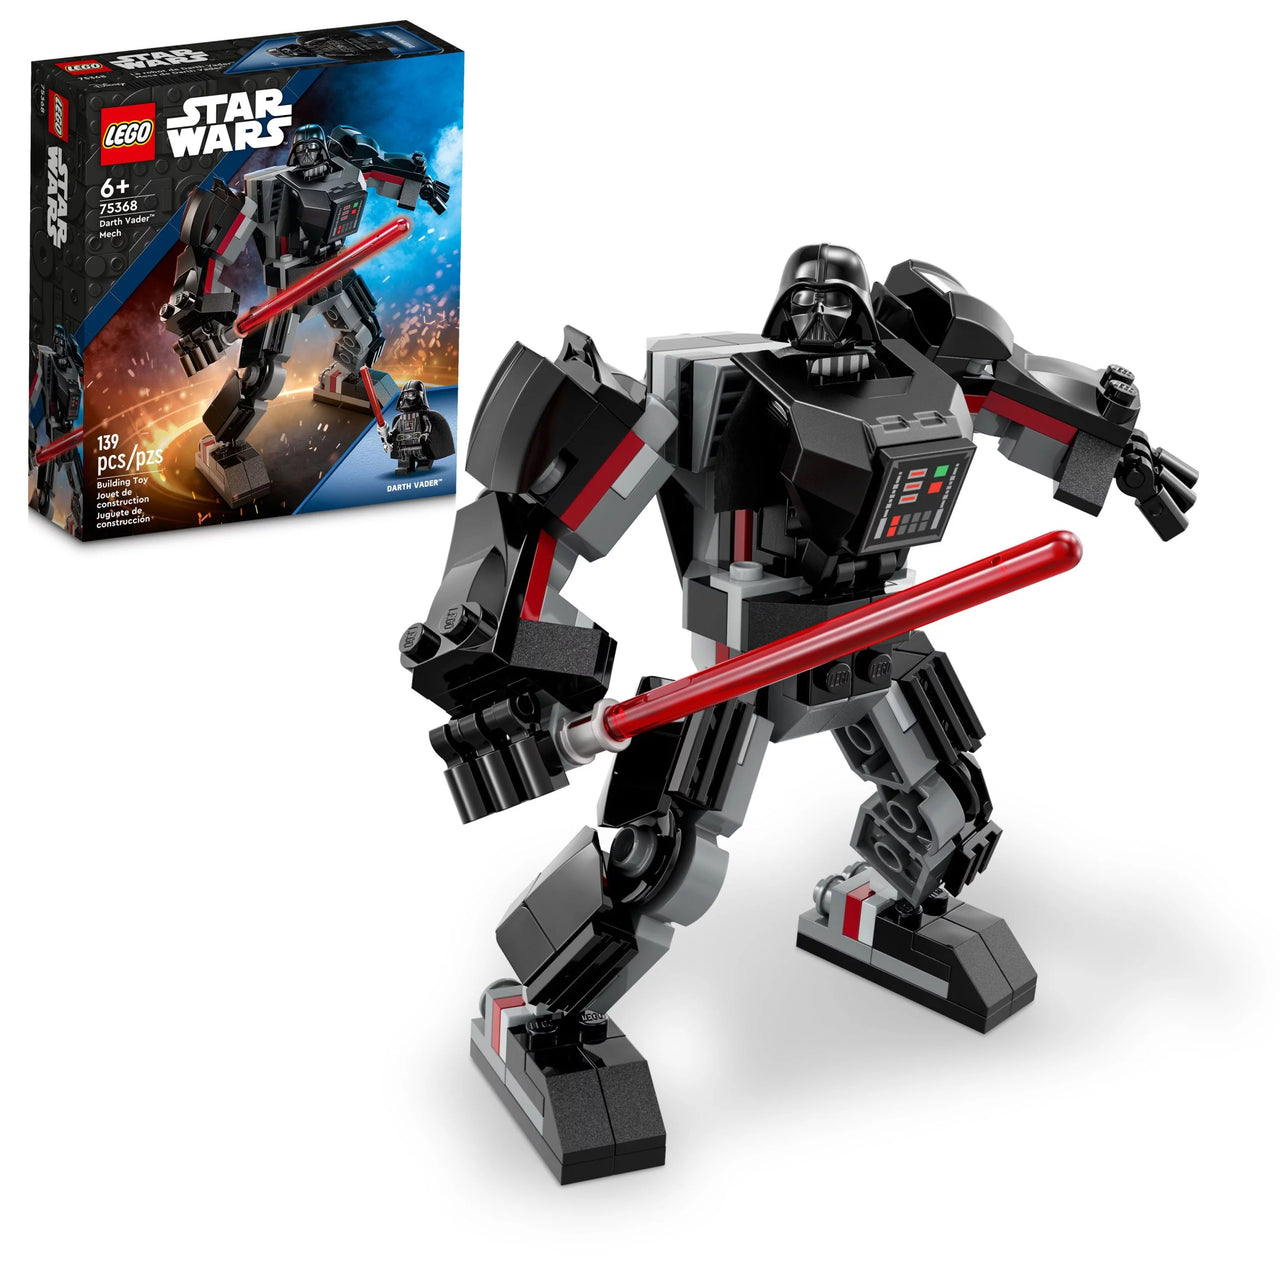 LEGO Star Wars Darth Vader Mech 75368 Buildable Star Wars Action Figure (139 Pcs) Master Kids Company LEGO 